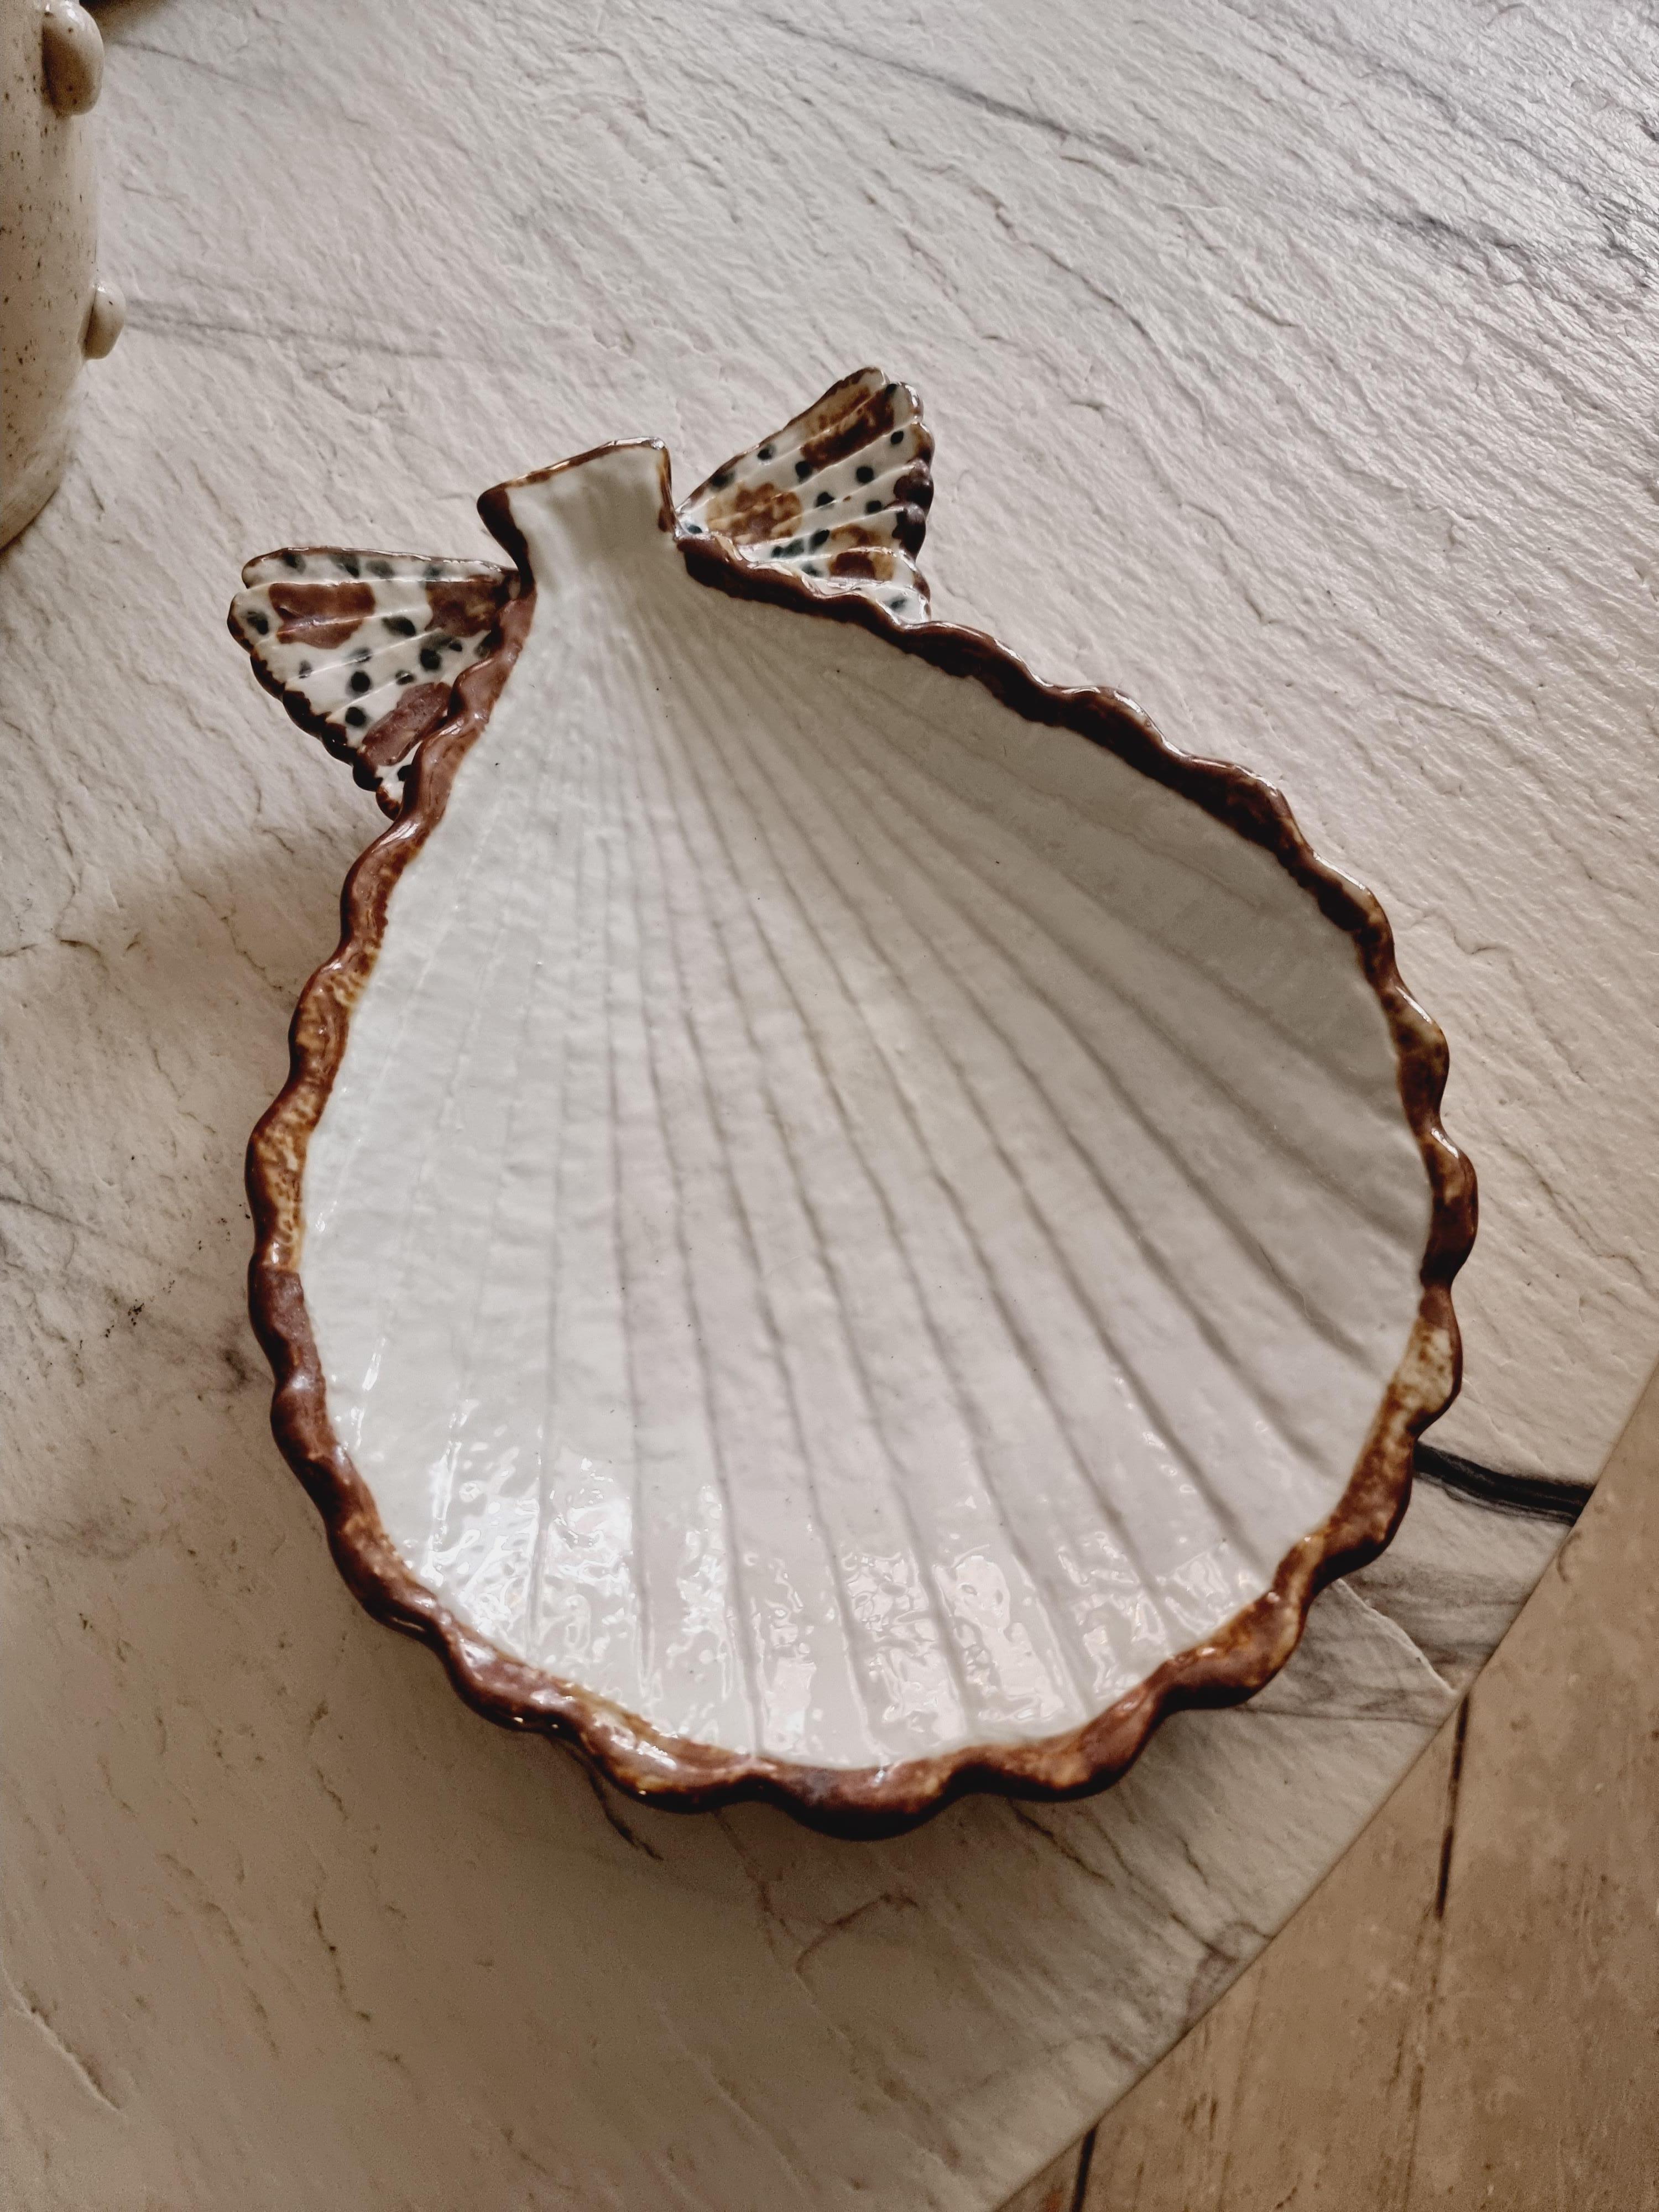 Rare Gunnar Nylund shell-shaped bowl in chamotte stonewear. Manufactured by Rörstrand, Sweden mid-1900s. 

In good condition. Marked: NYLUND, SVERIGE, RÖRSTRAND.